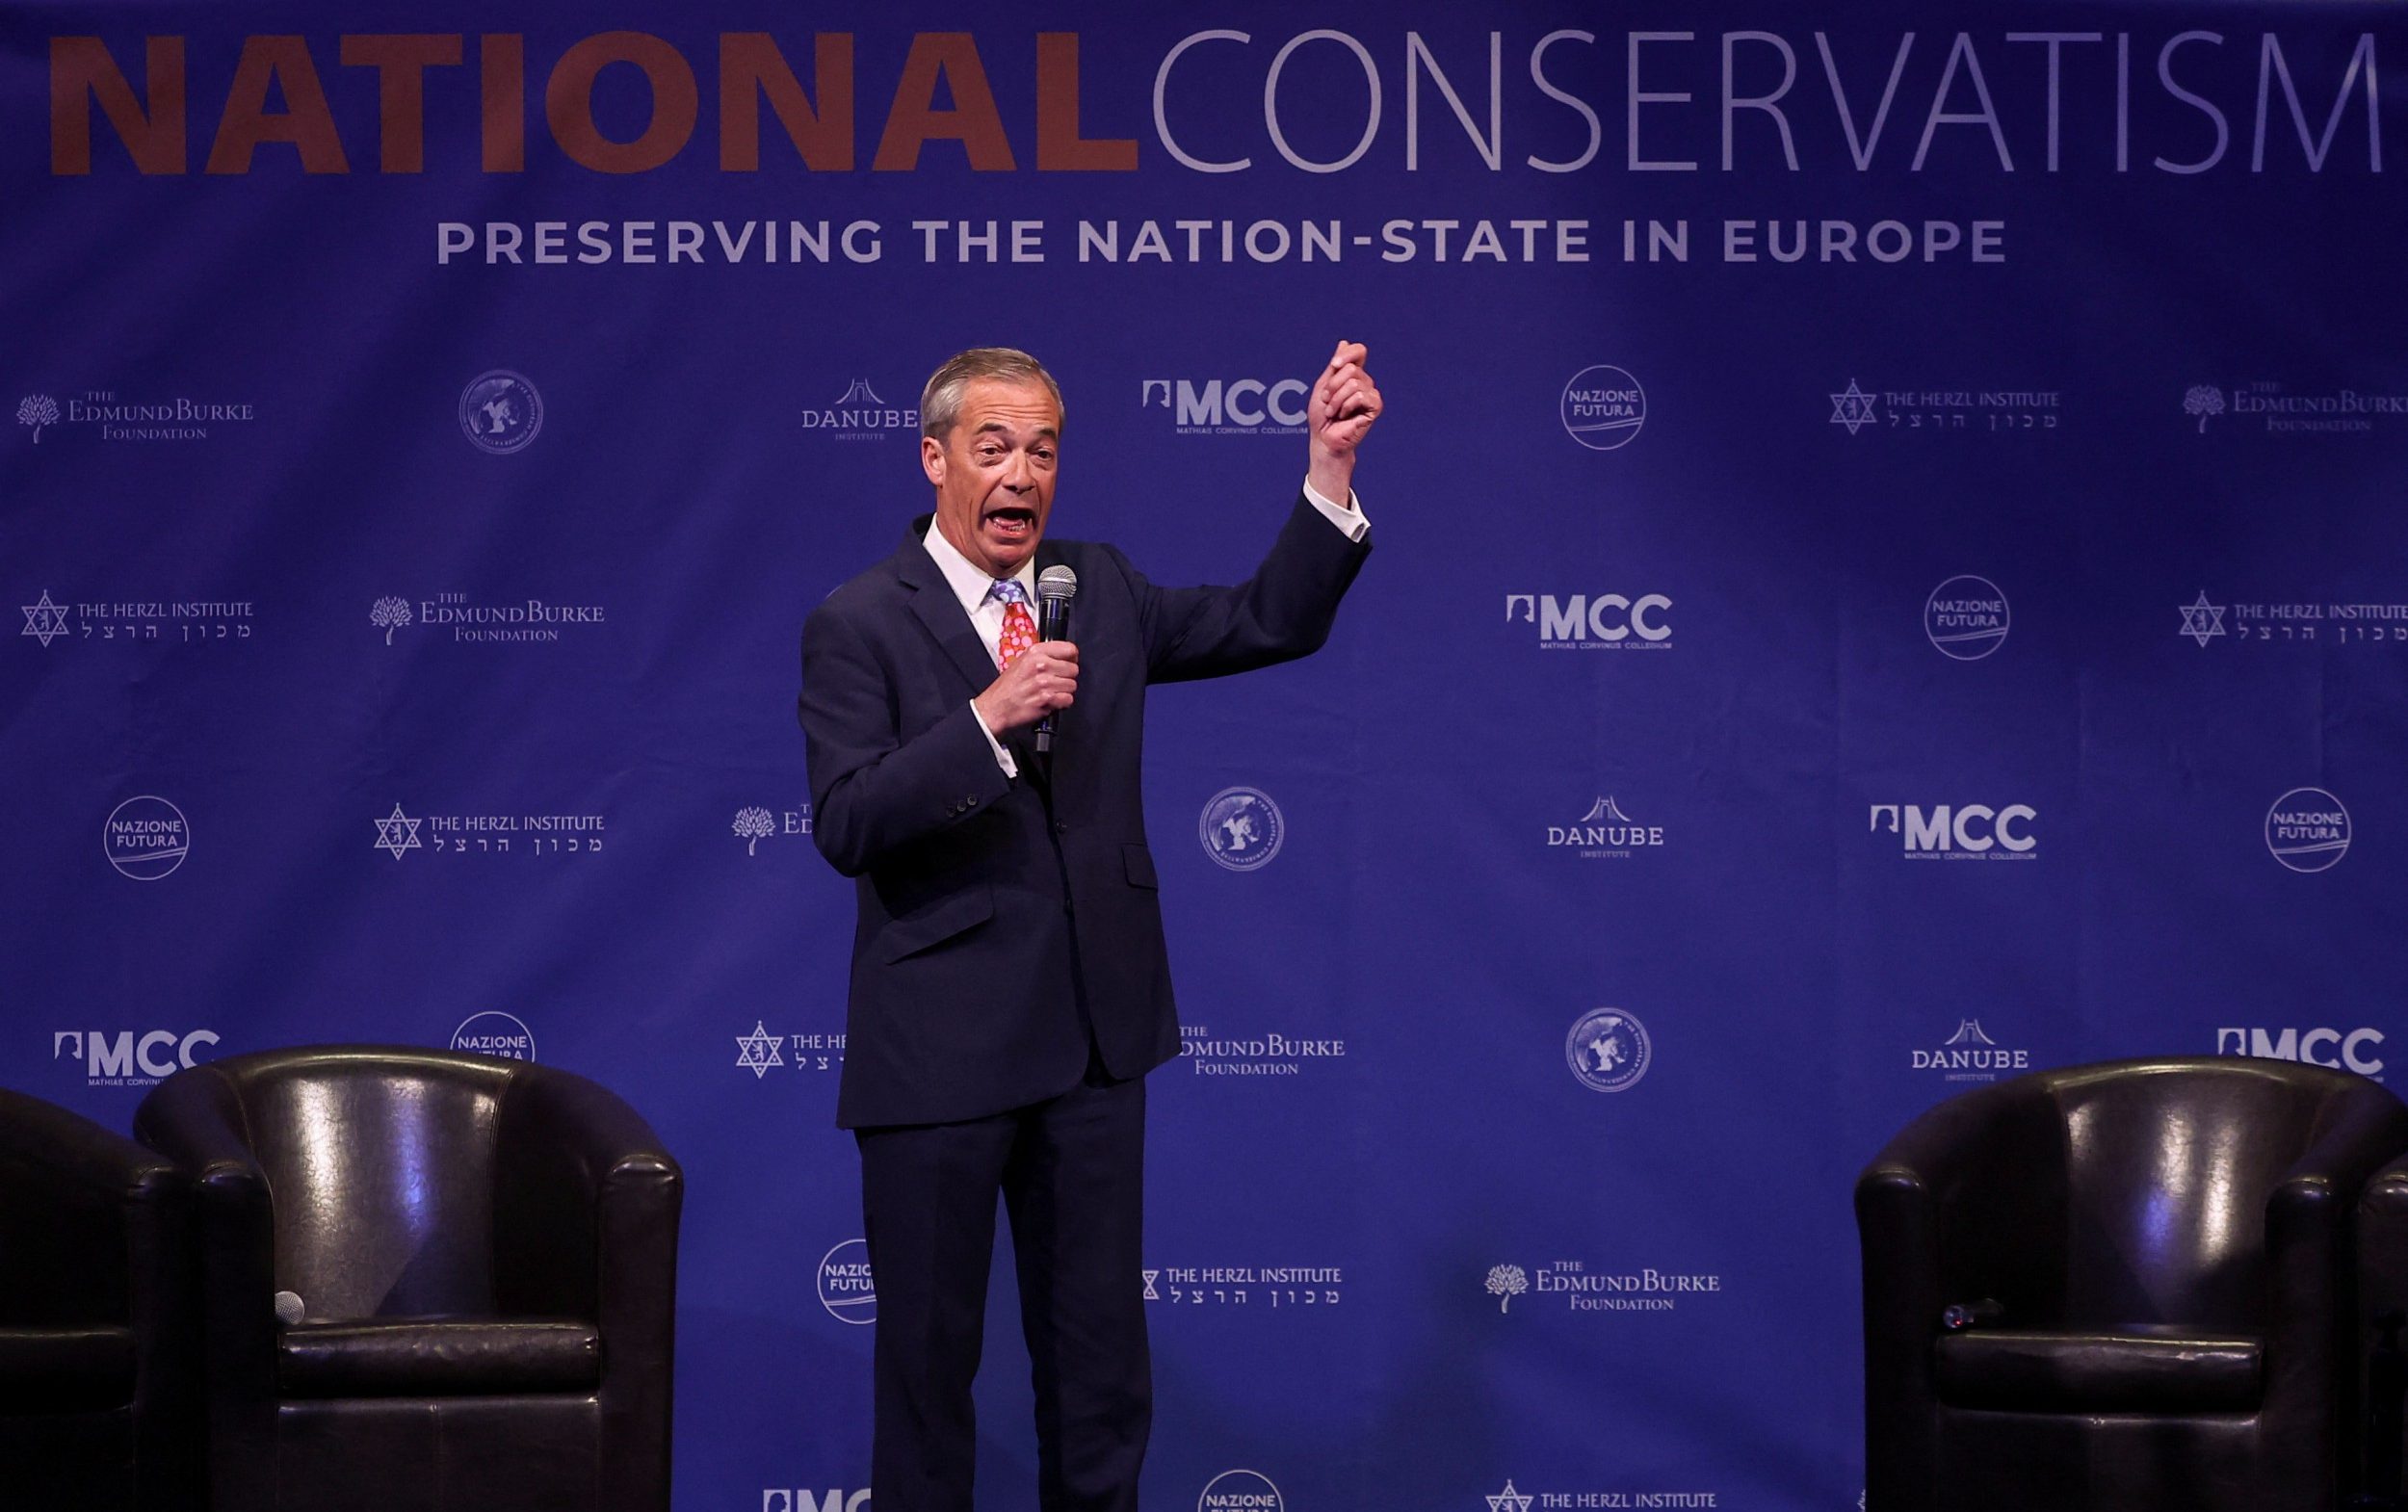 as farage spoke, the crowds dashed for the exit – with good reason